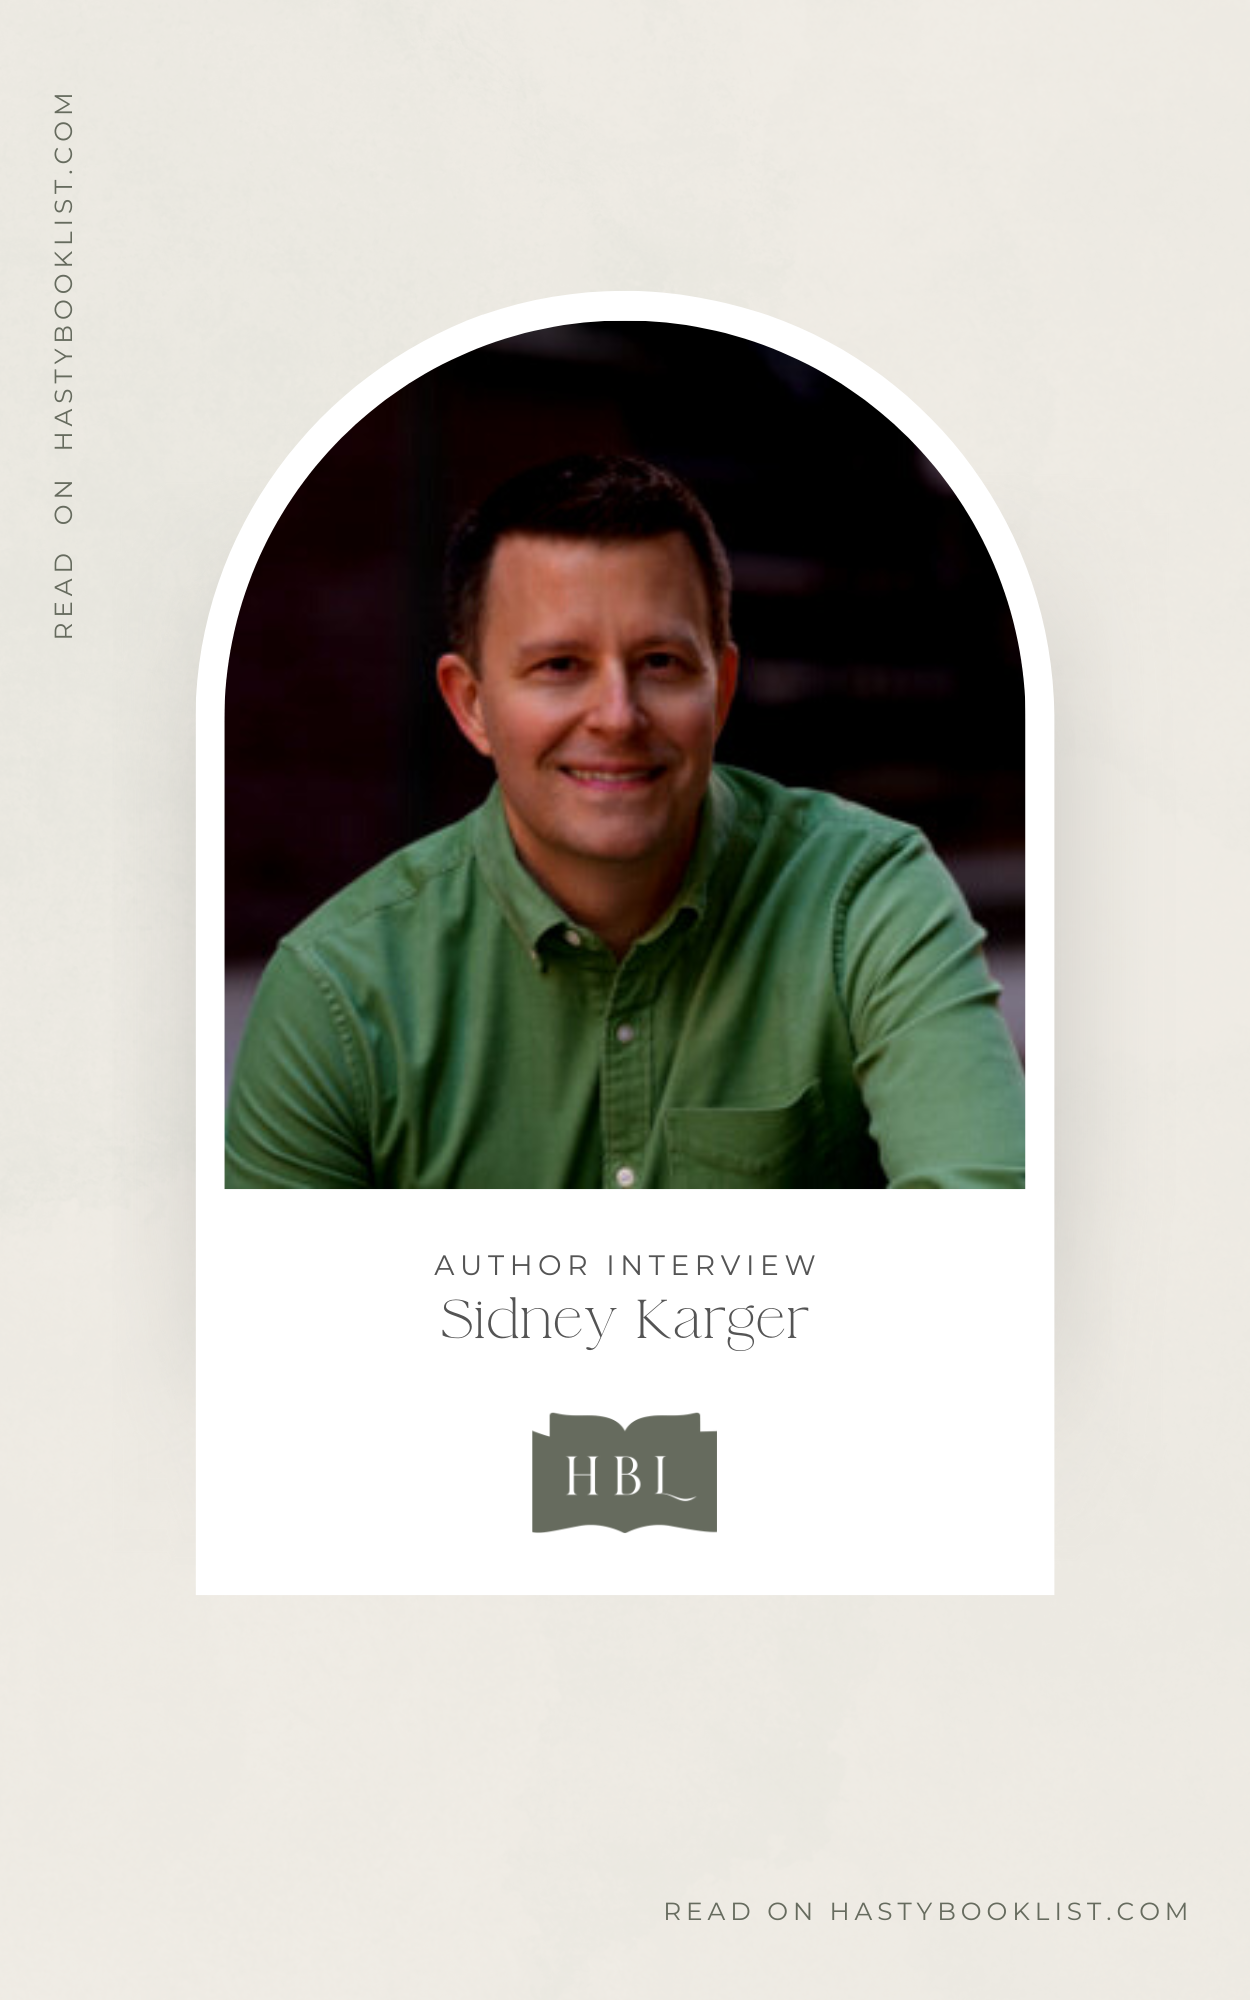 Author Interview with Sidney Karger